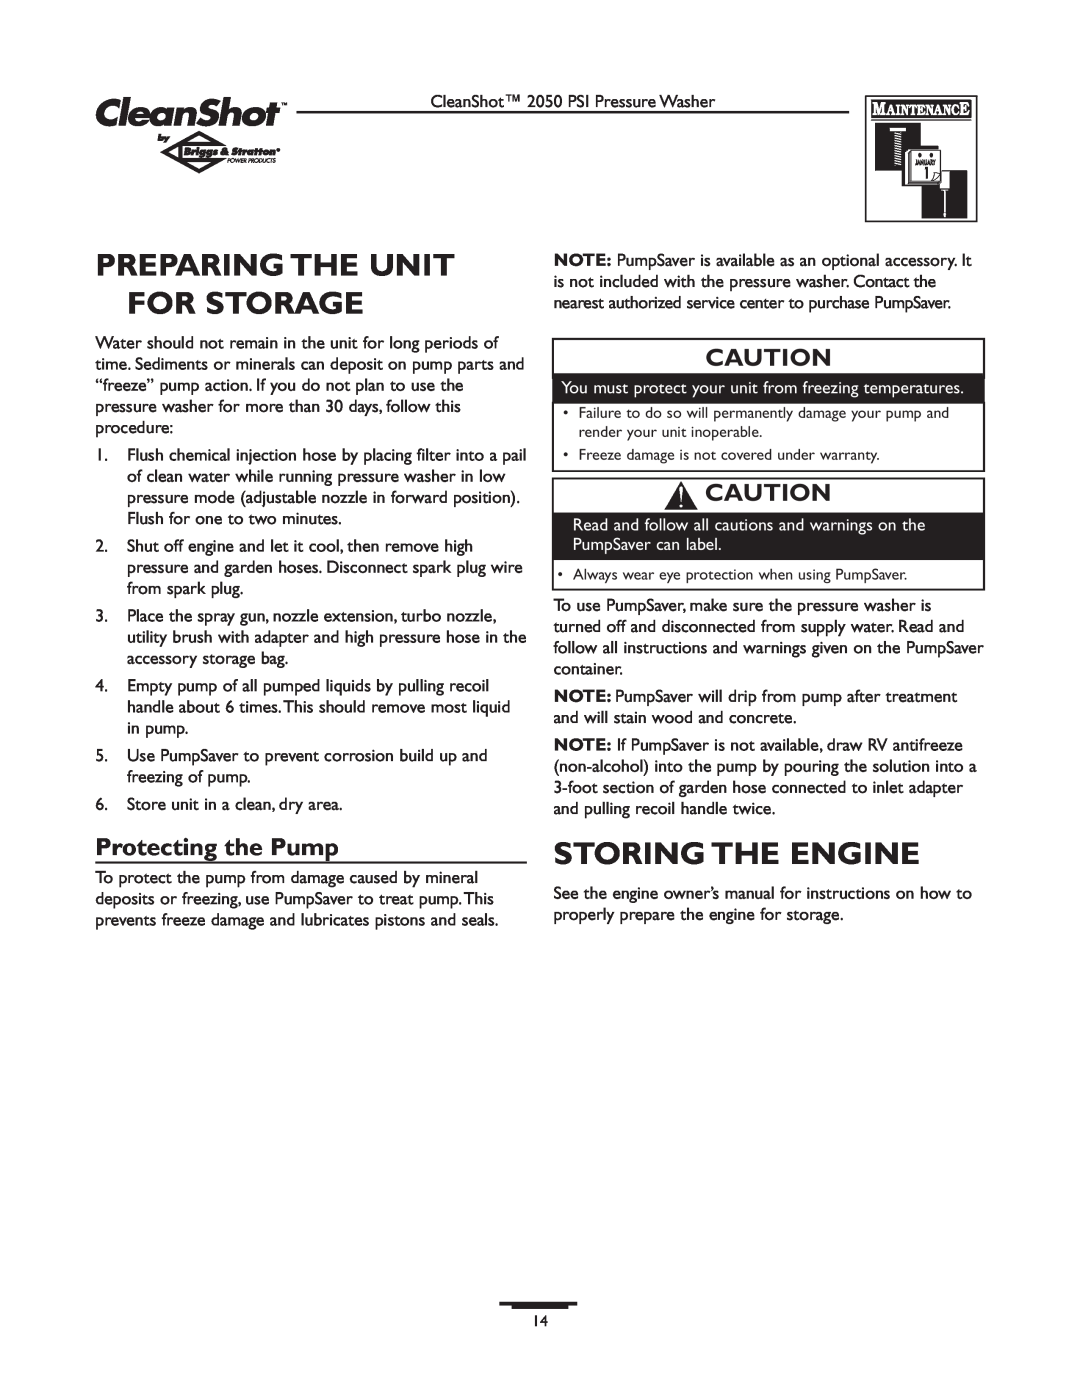 Briggs & Stratton 2050PSI owner manual Preparing The Unit For Storage, Storing The Engine, Protecting the Pump 